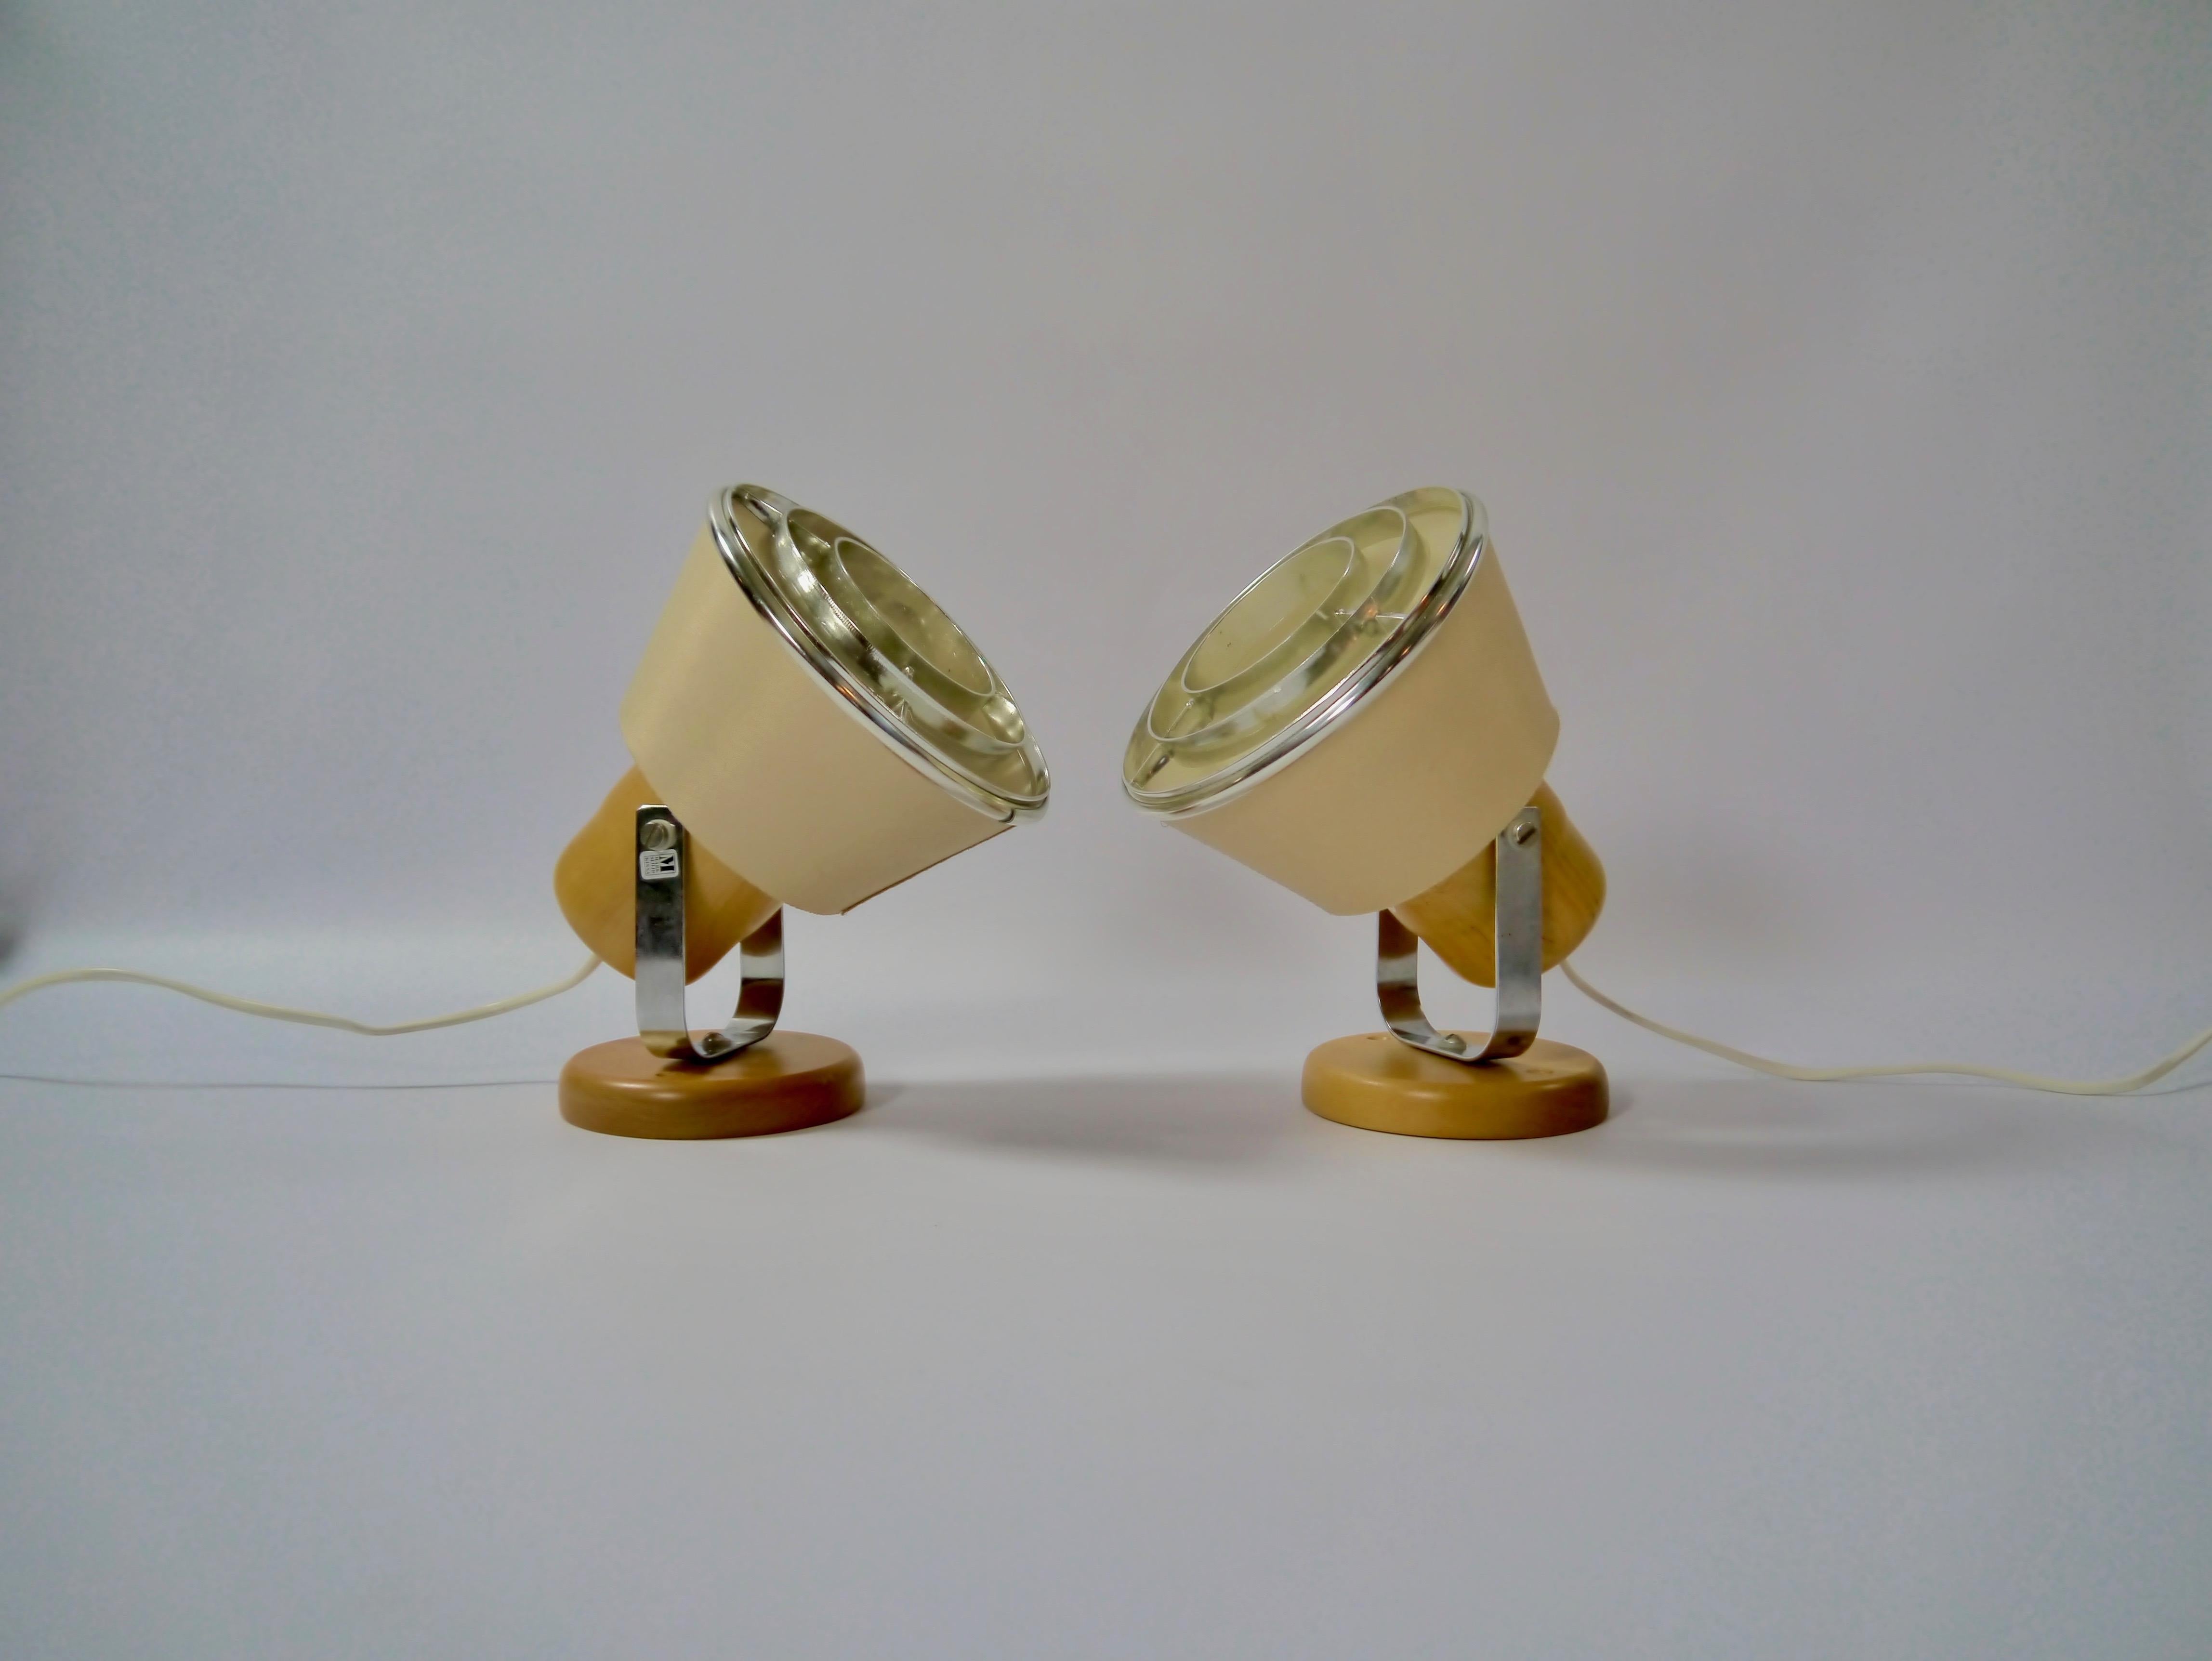 Pair of wall mount bedside lamps fabricated by Markslöjd in the 1970s. The beige fabric lampshade gives a soft and warm light.